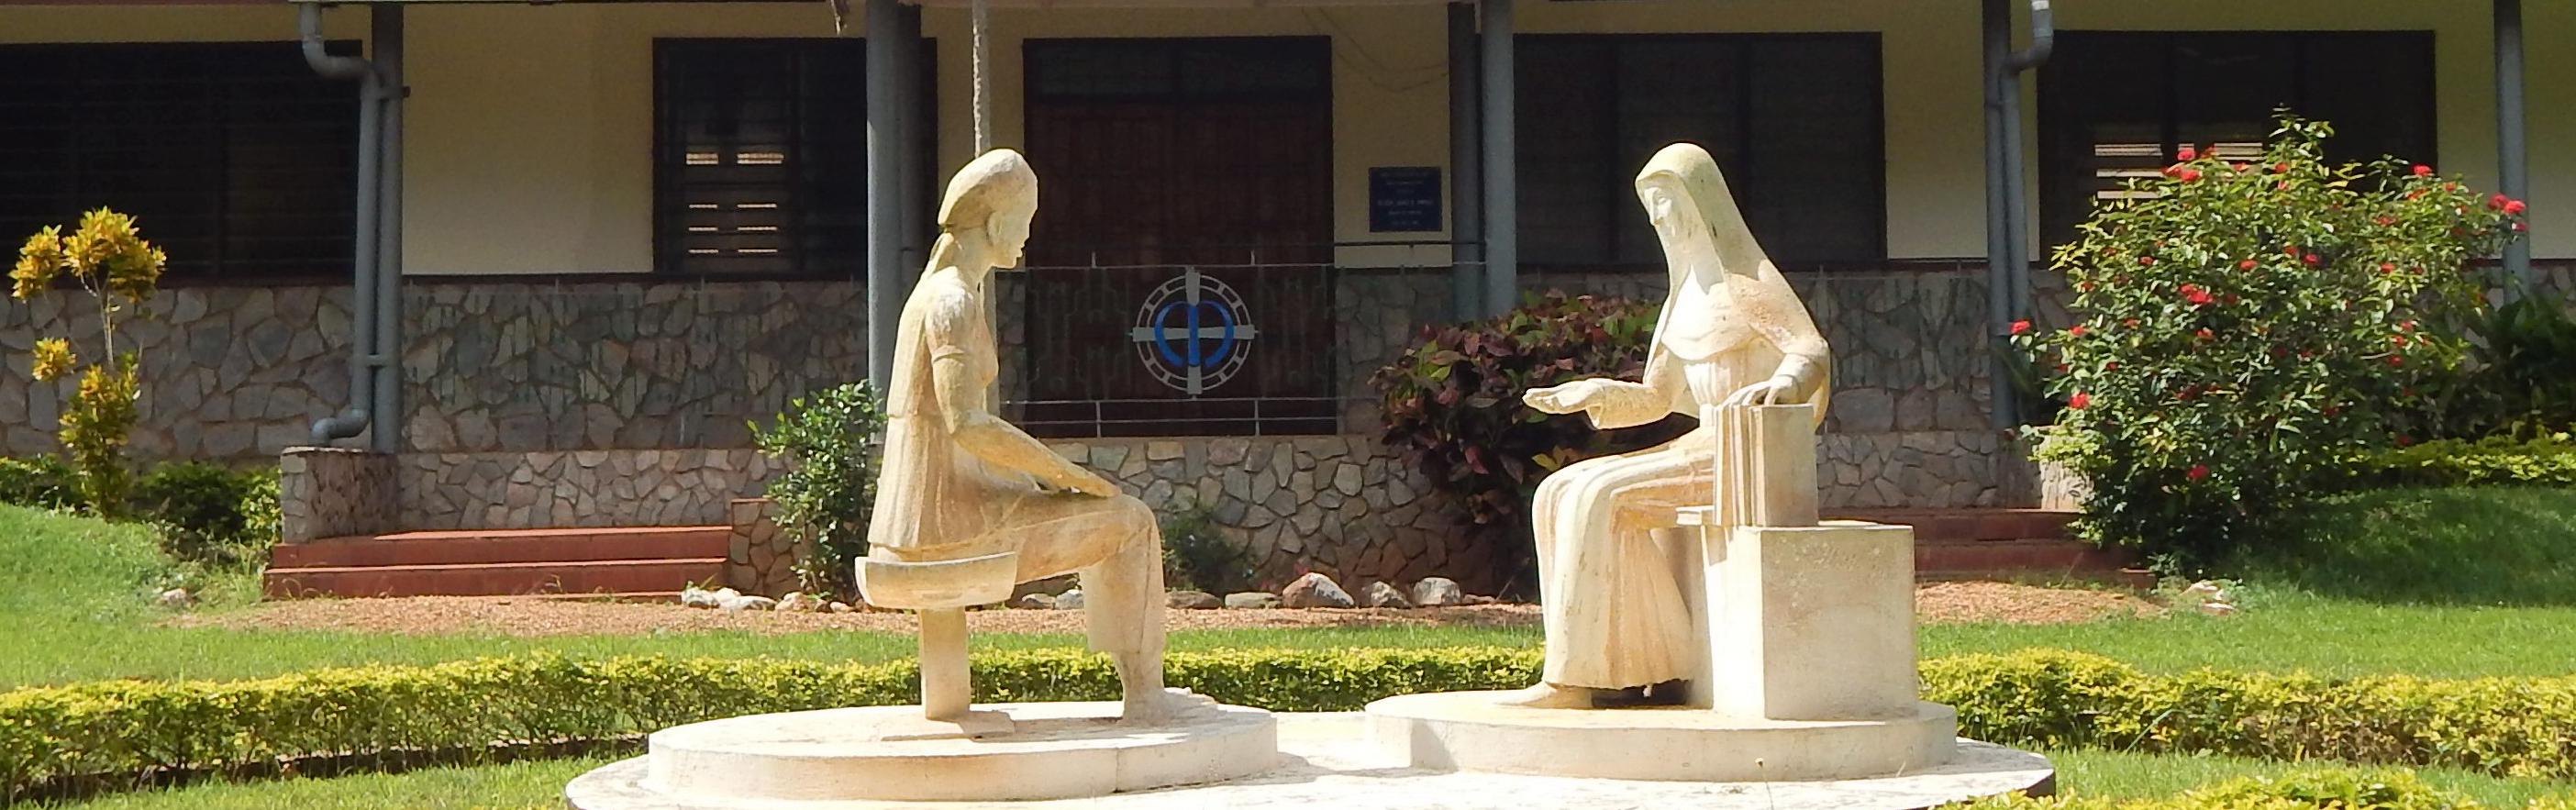 Statue of Blessed Theresa Gerhardinger, right, having a discussion with a novice. Accra, Ghana